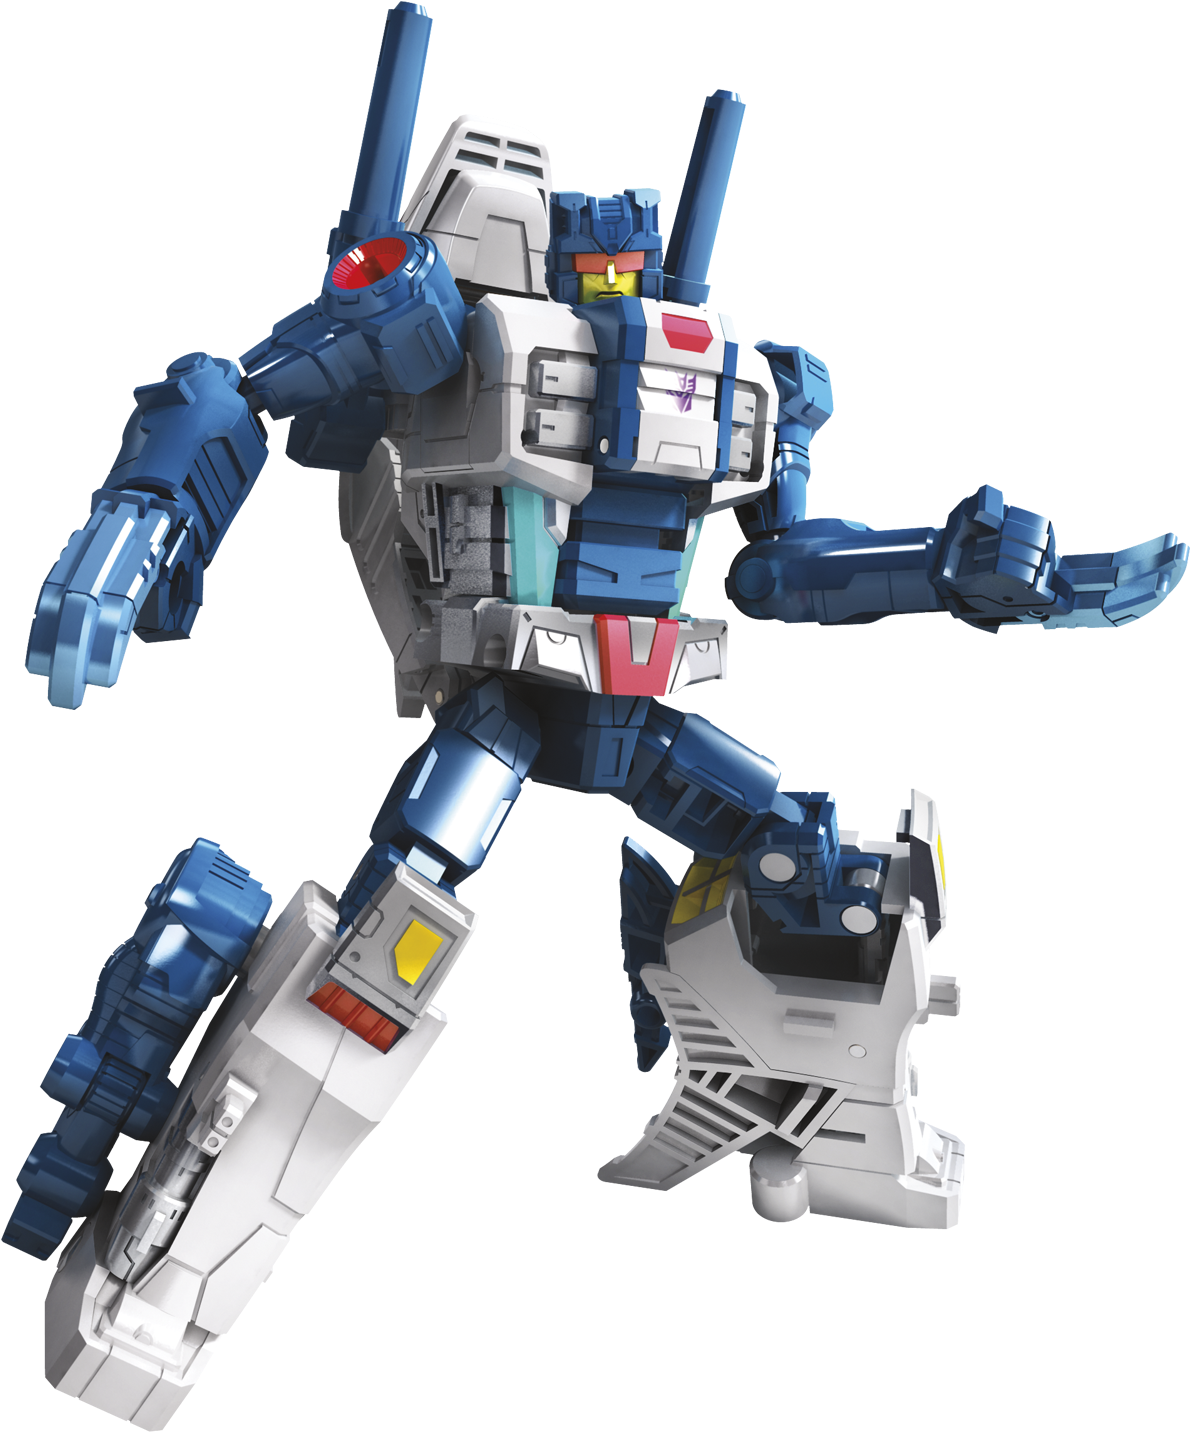 Official Images & Press Release For "power Of The Primes" - Power Of Prime Transformers (1500x1500)